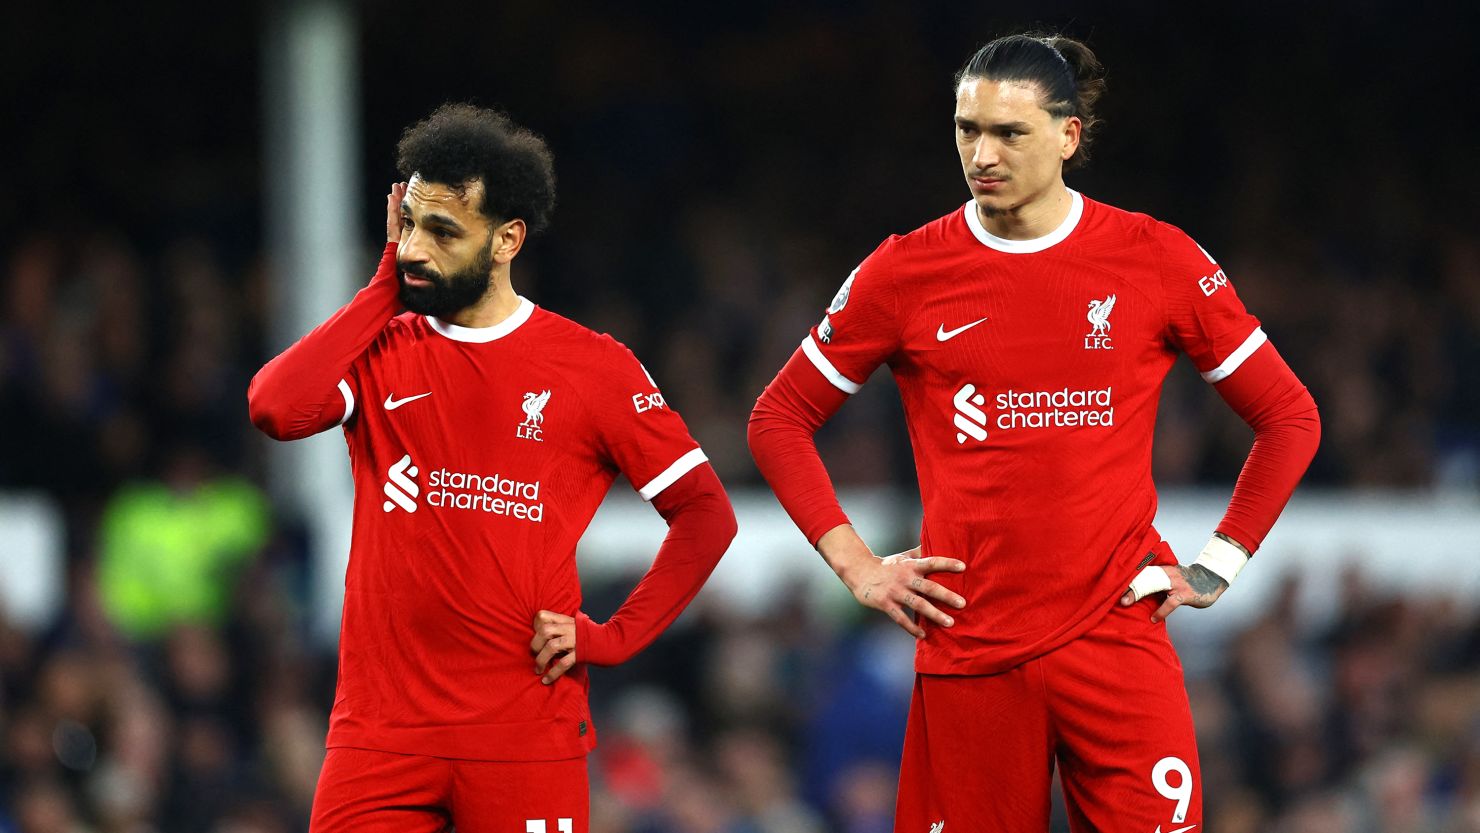 Mo Salah and Darwin Núñez missed several chances for Liverpool against Everton.